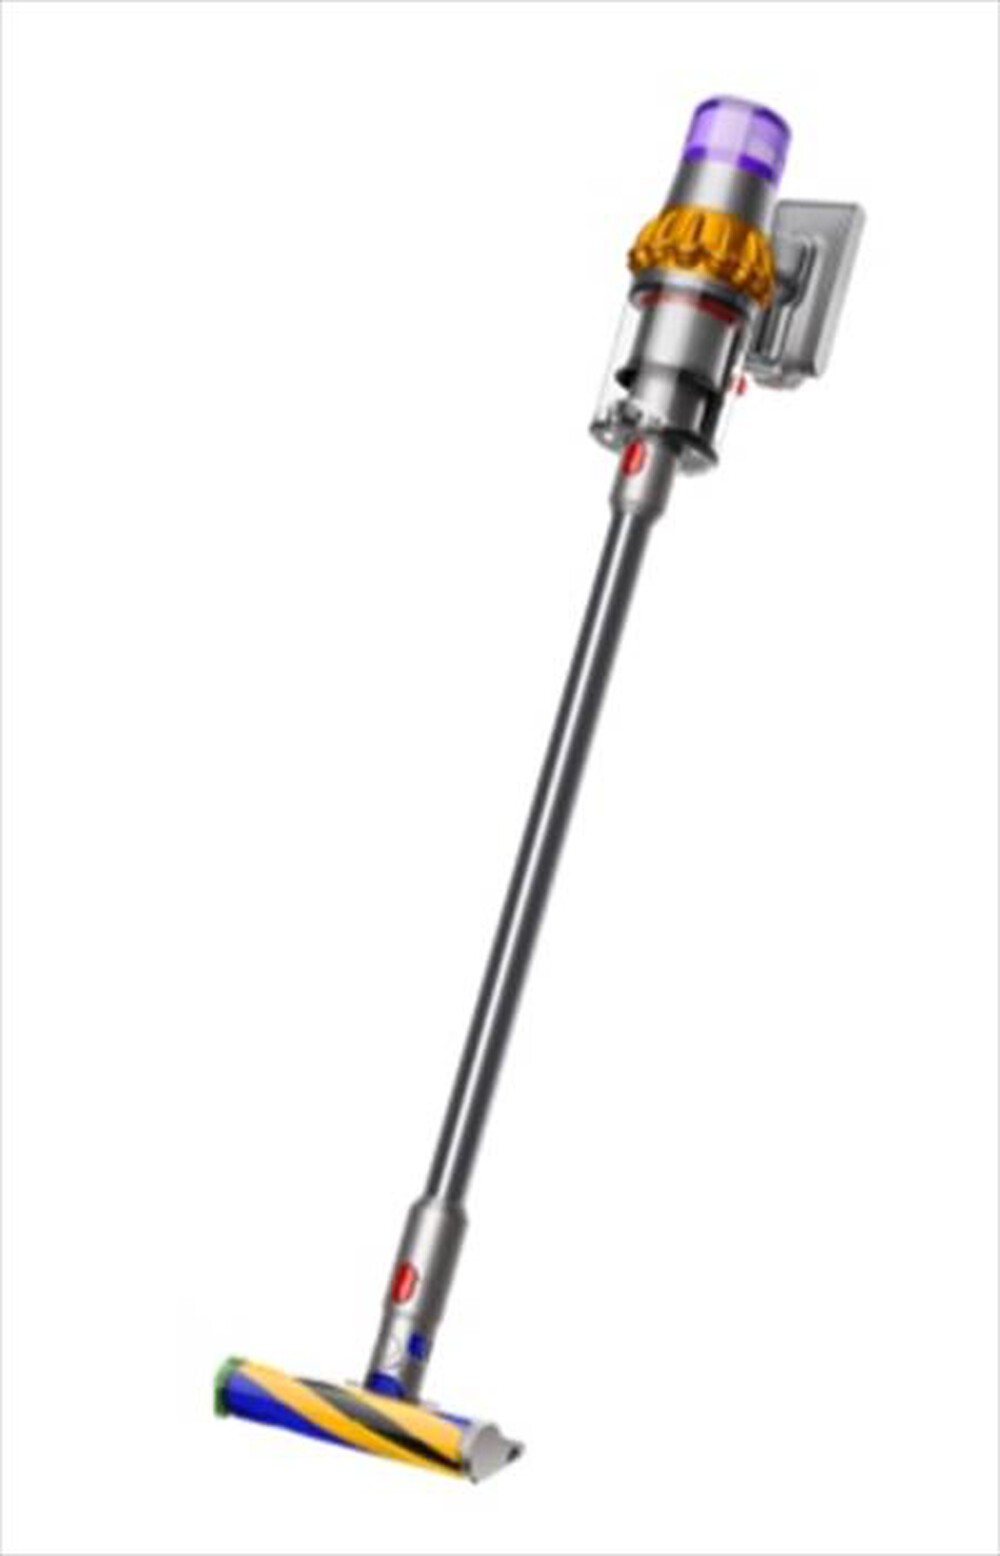 "DYSON - V15 ABSOLUTE - "